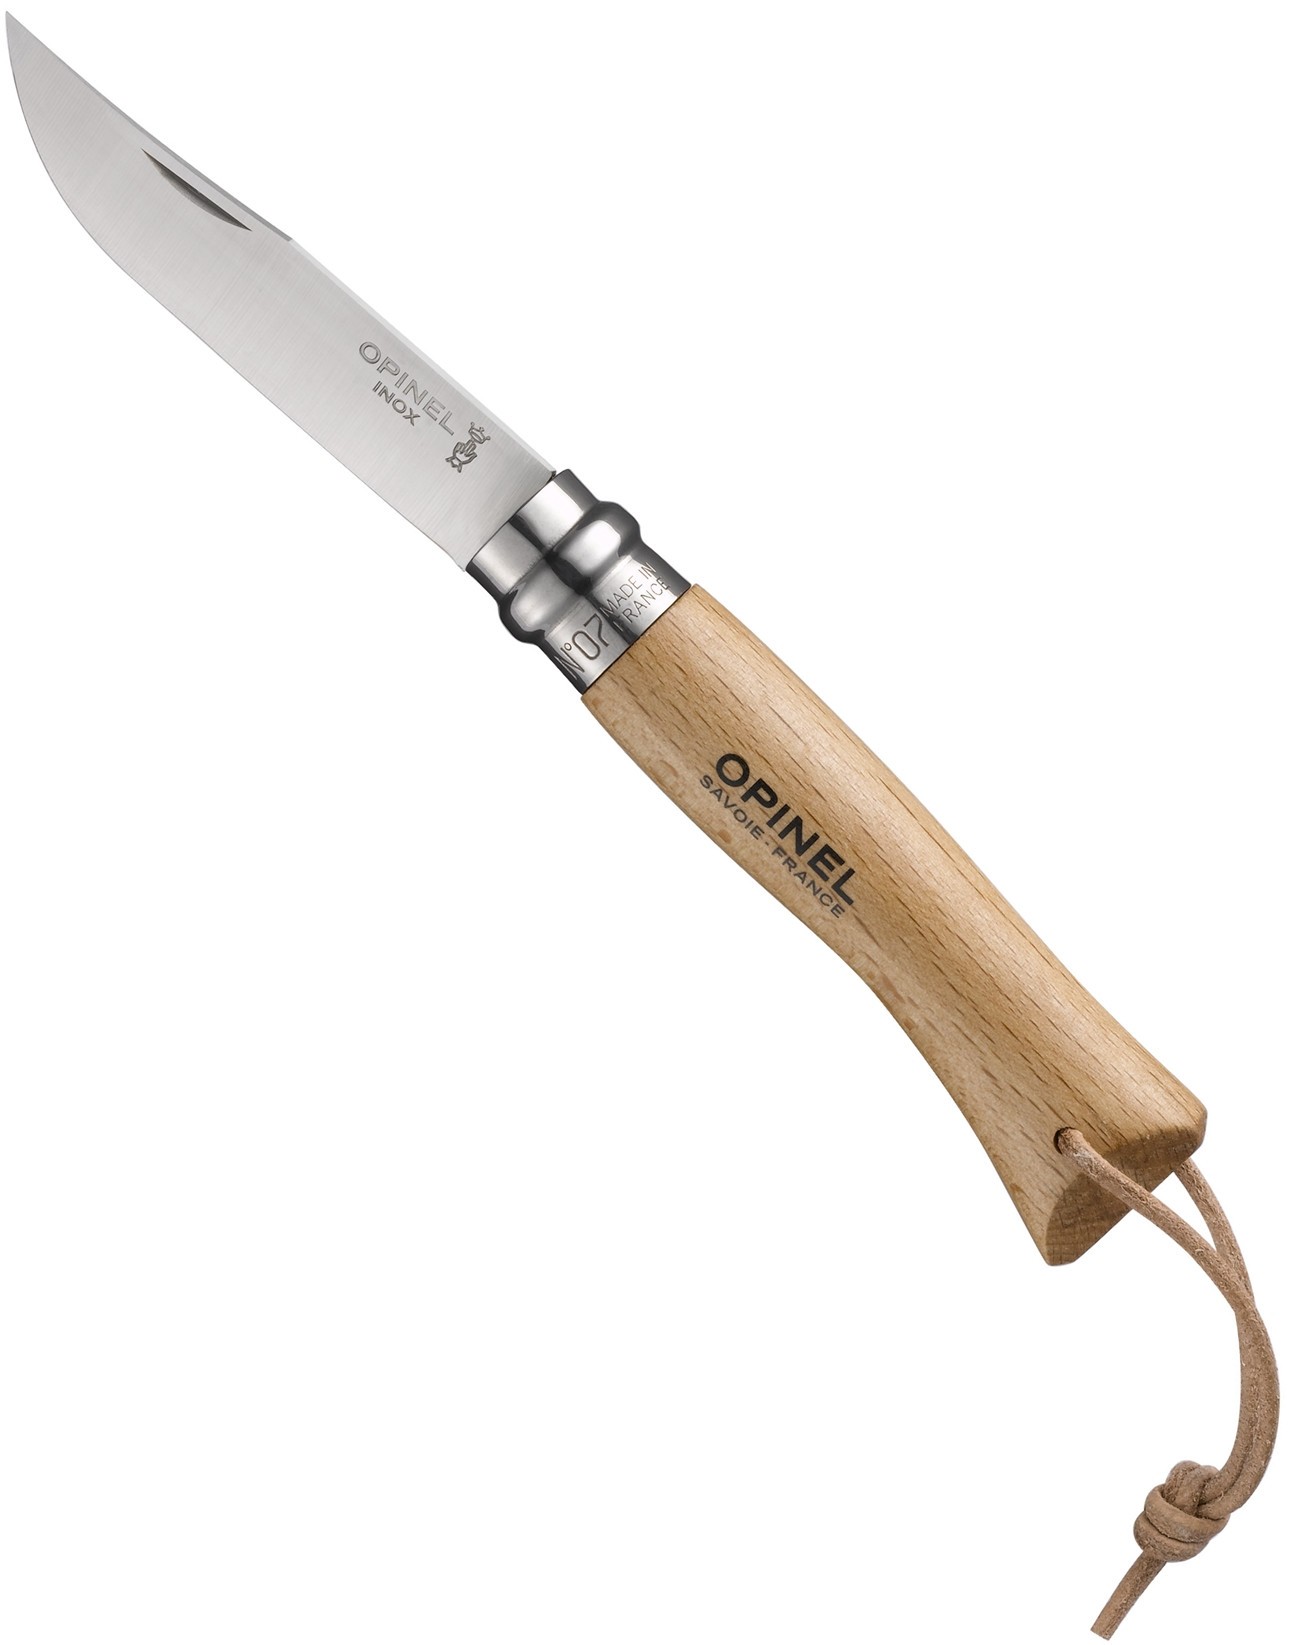 Opinel No.7 stainless steel with leather lace